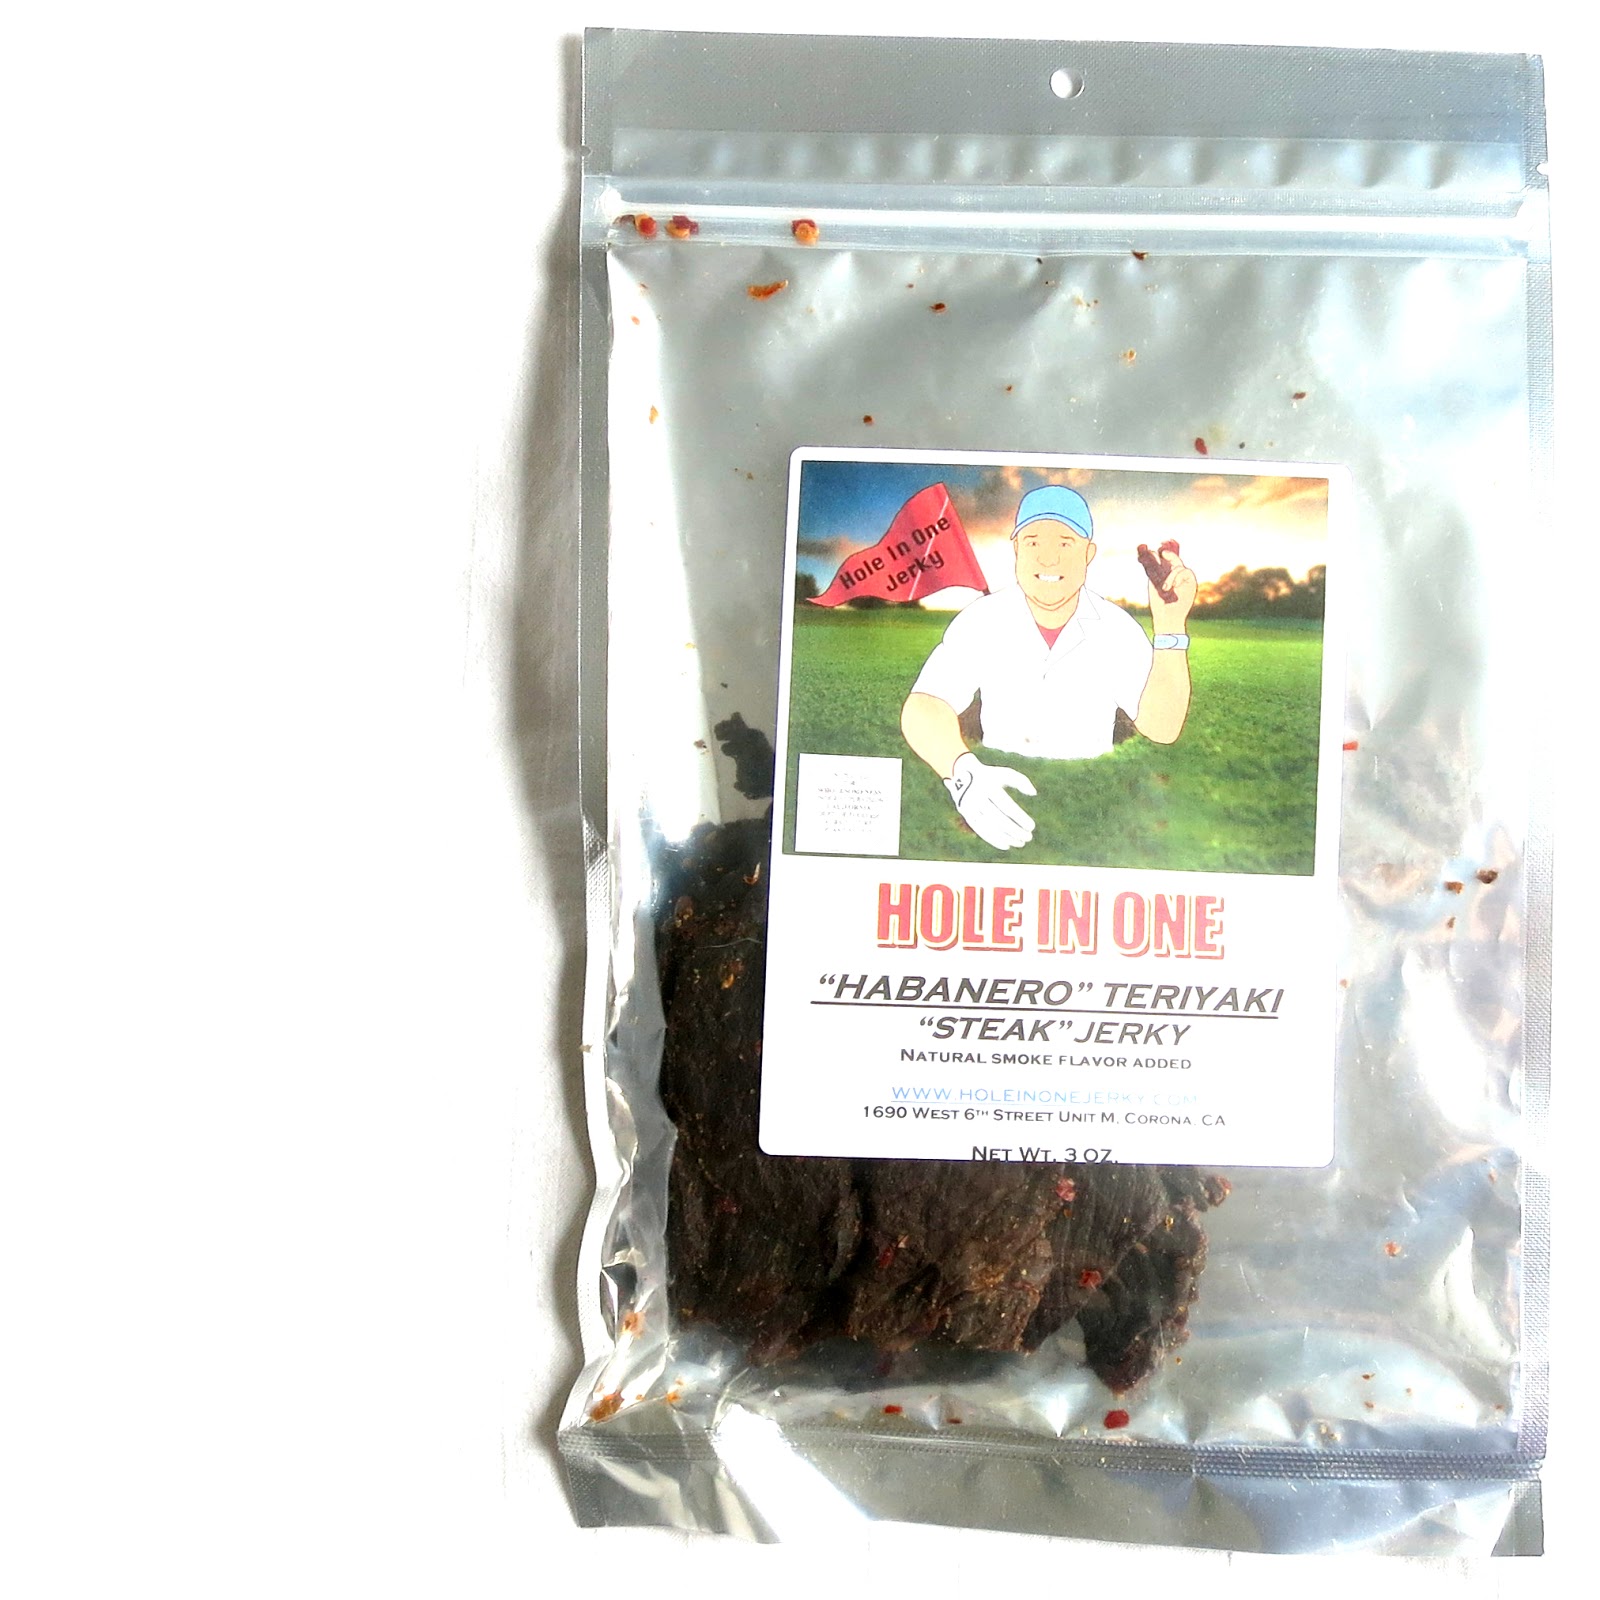 New Bags are in!! Page 22 - Chudabeef Jerky Co.